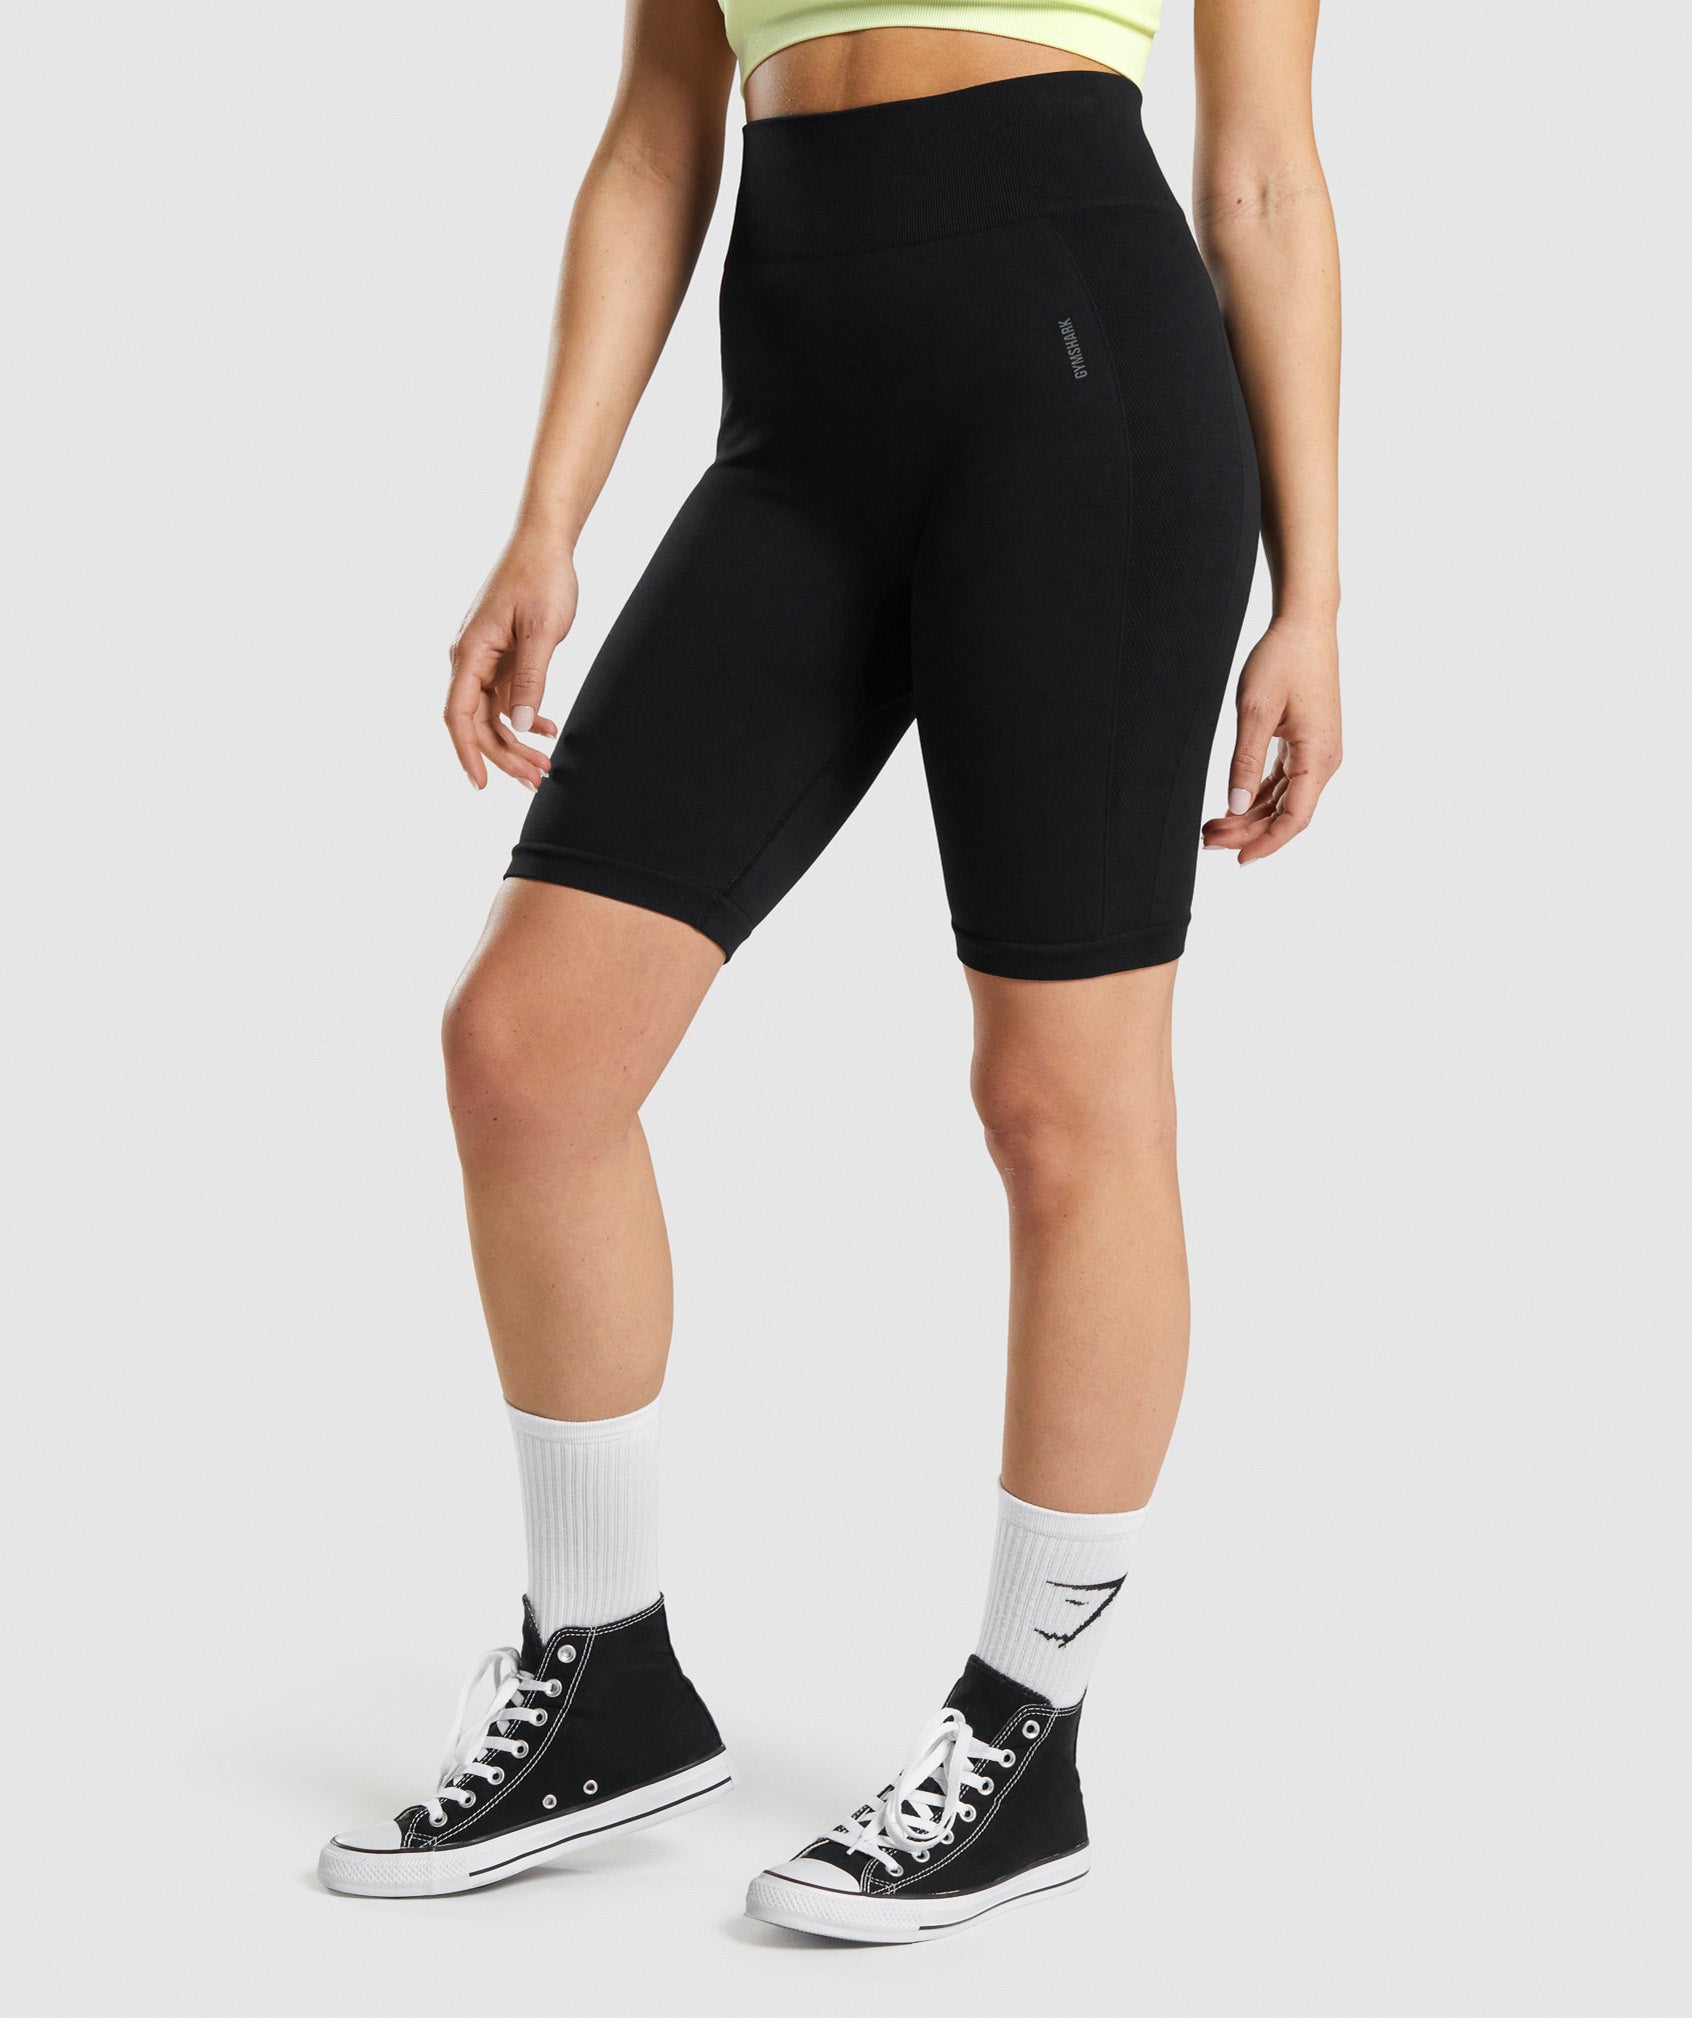 EVERYTHING MUST GO Gymshark ENERGY SEAMLESS - Cycling Shorts - Women's -  black - Private Sport Shop